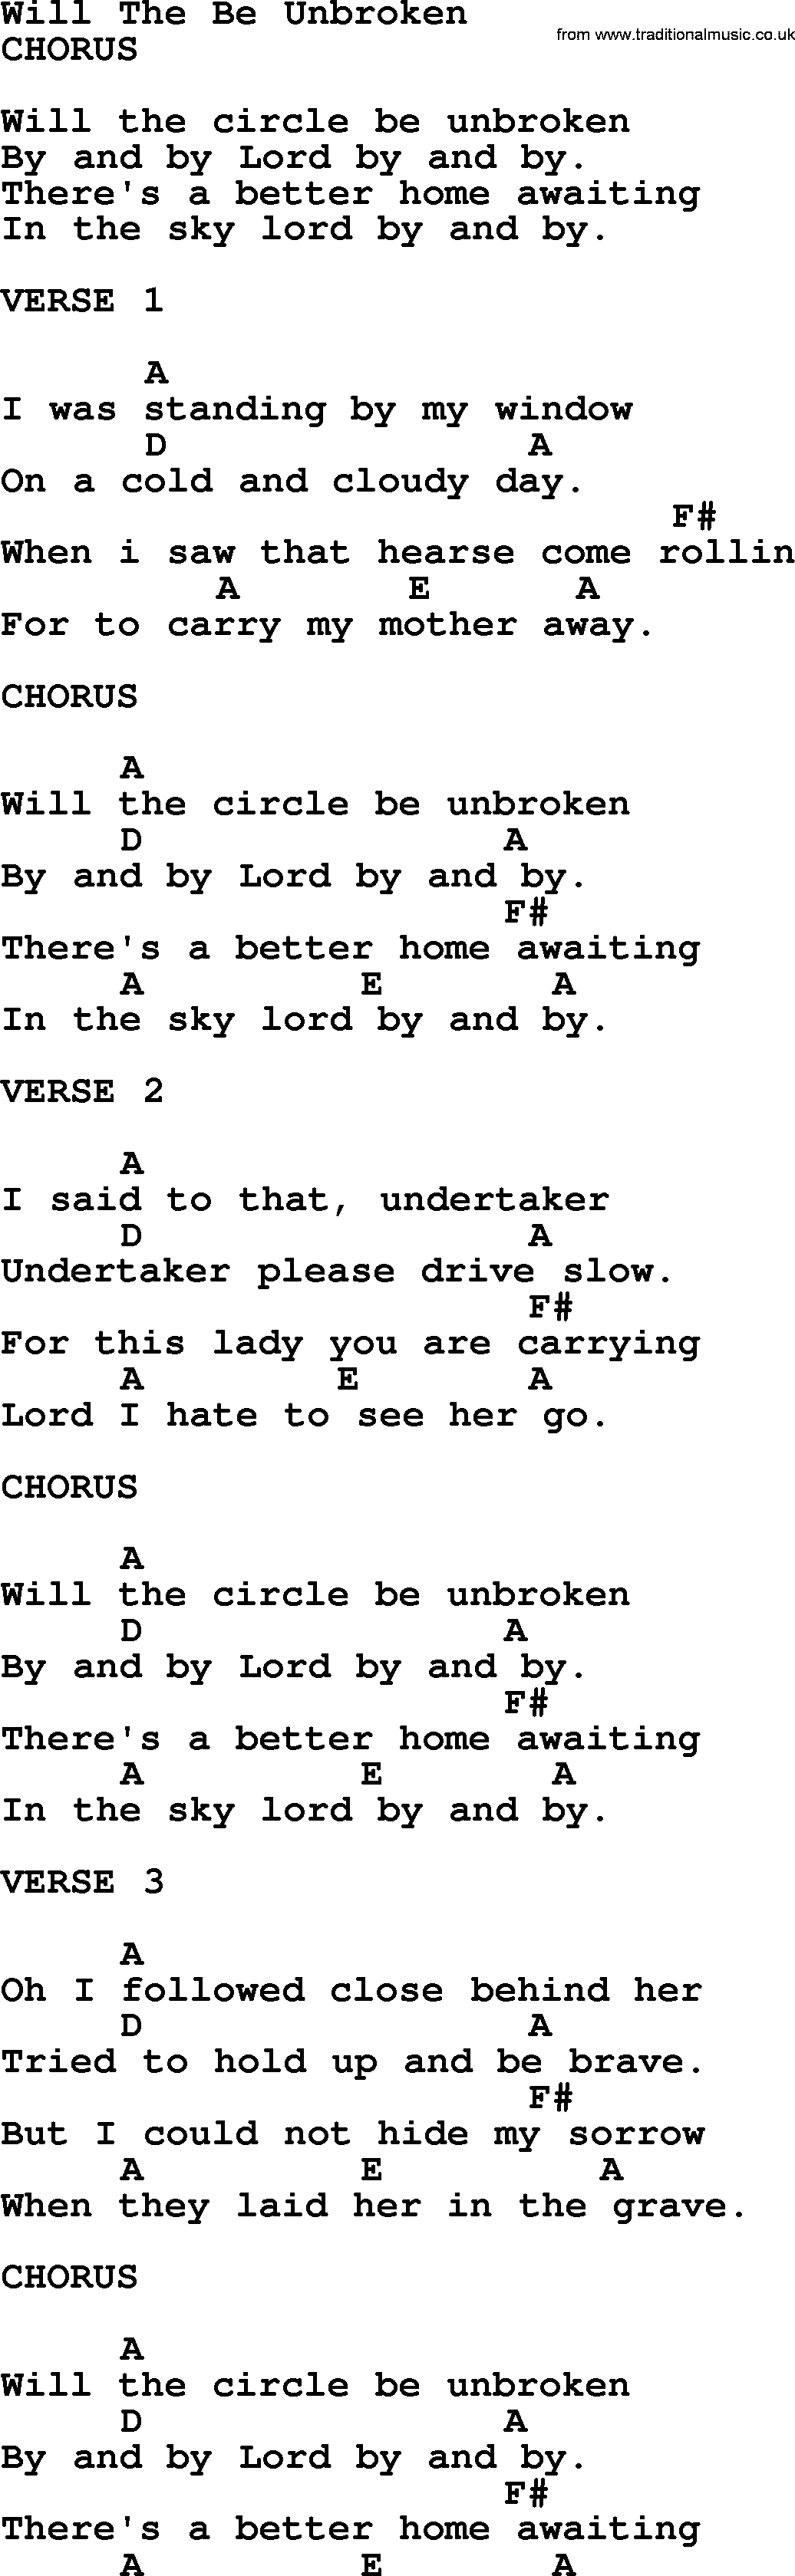 Bluegrass song: Will The Be Unbroken, lyrics and chords